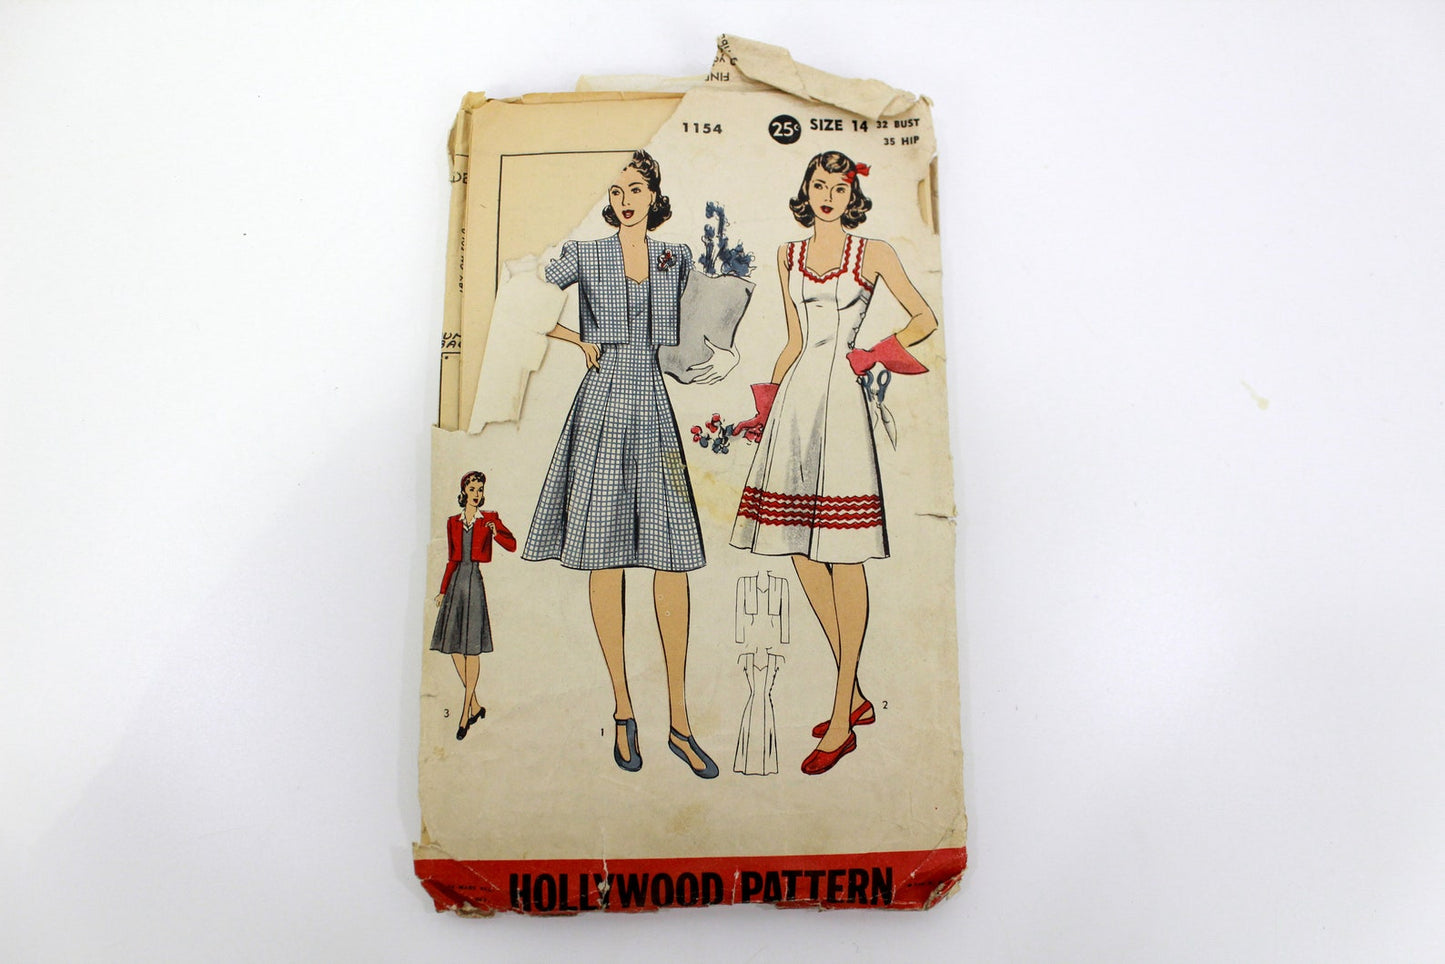 Vintage 1940s Women's Jumper and Bolero Sewing Pattern, Hollywood Pattern Company 1154, Complete, Bust 32"